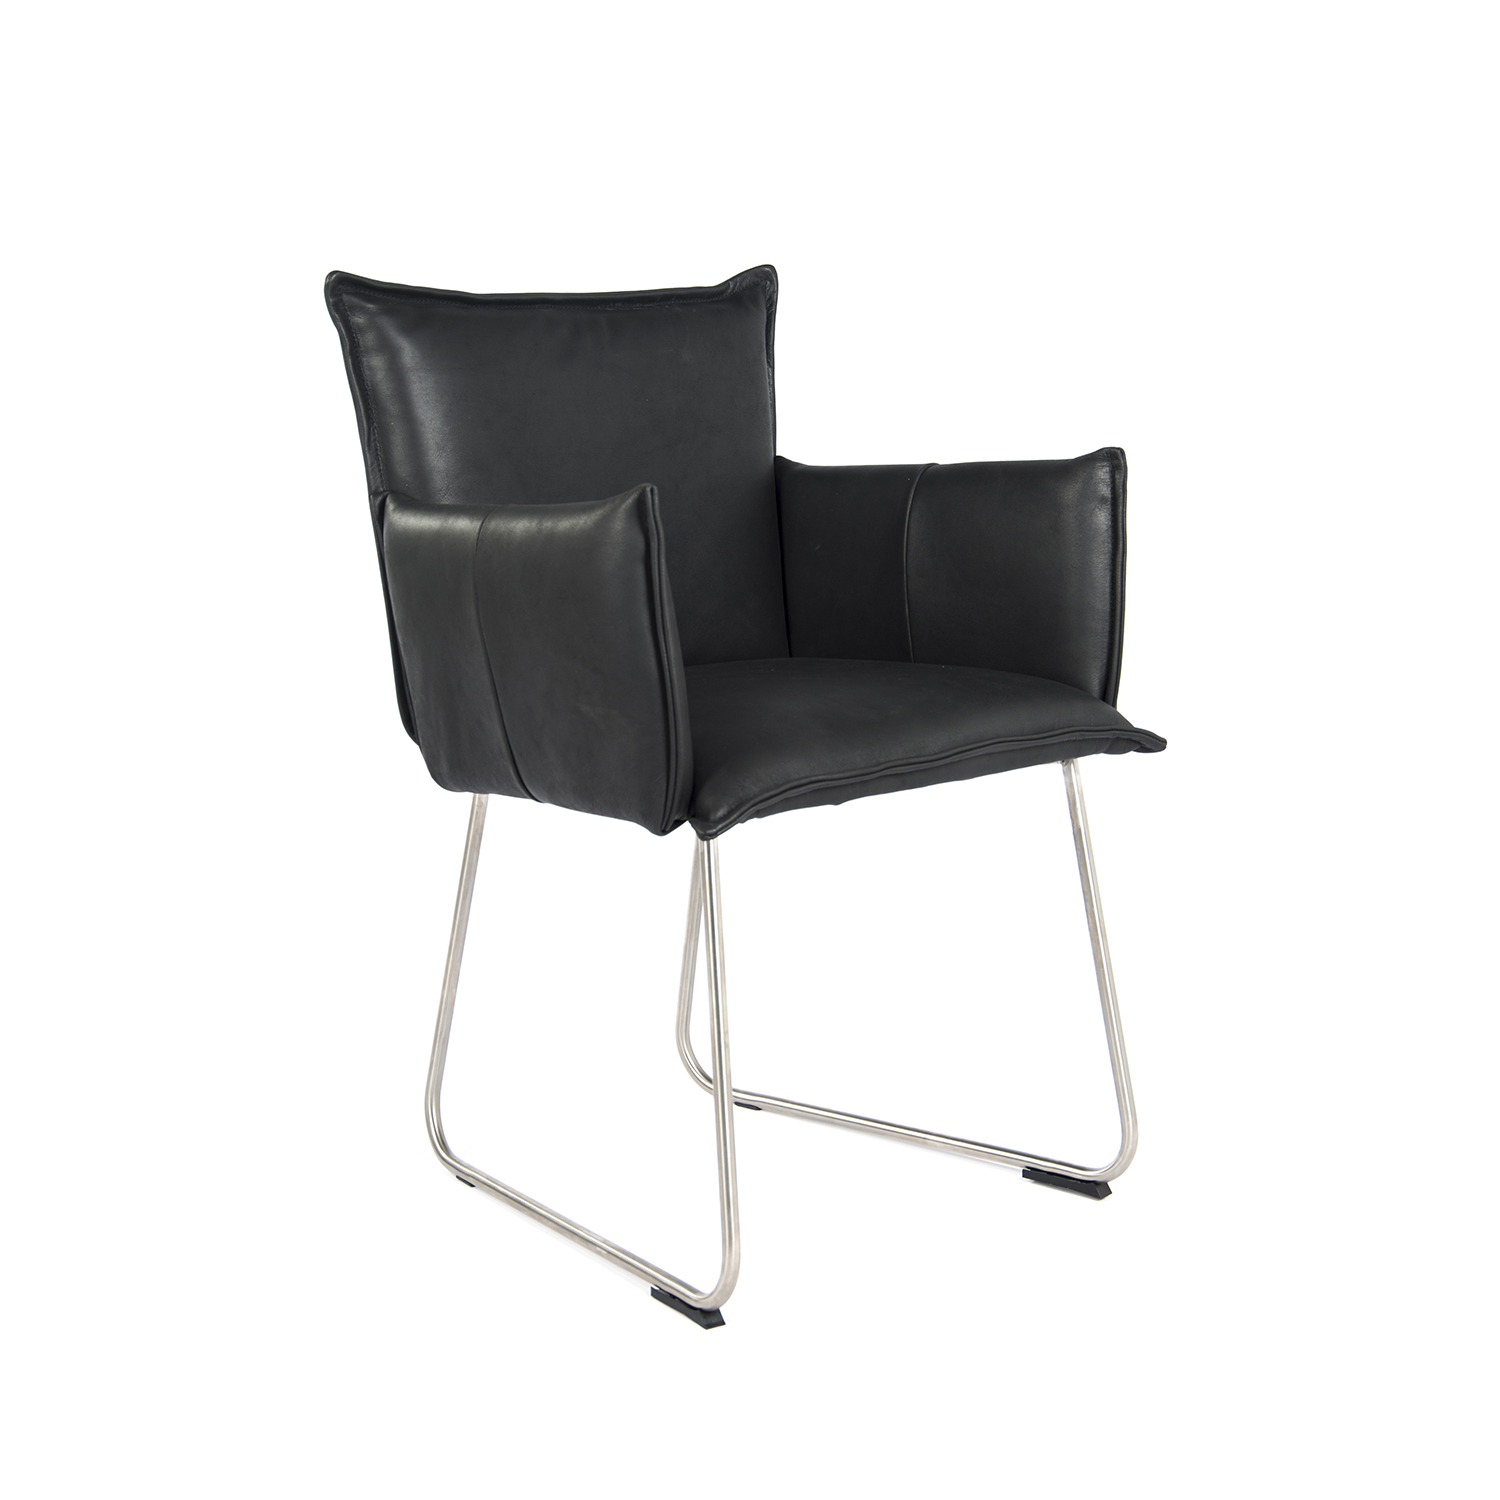 Duke Dining Chair With Arm Stainless Steel Bonanza Black Oblique (1)